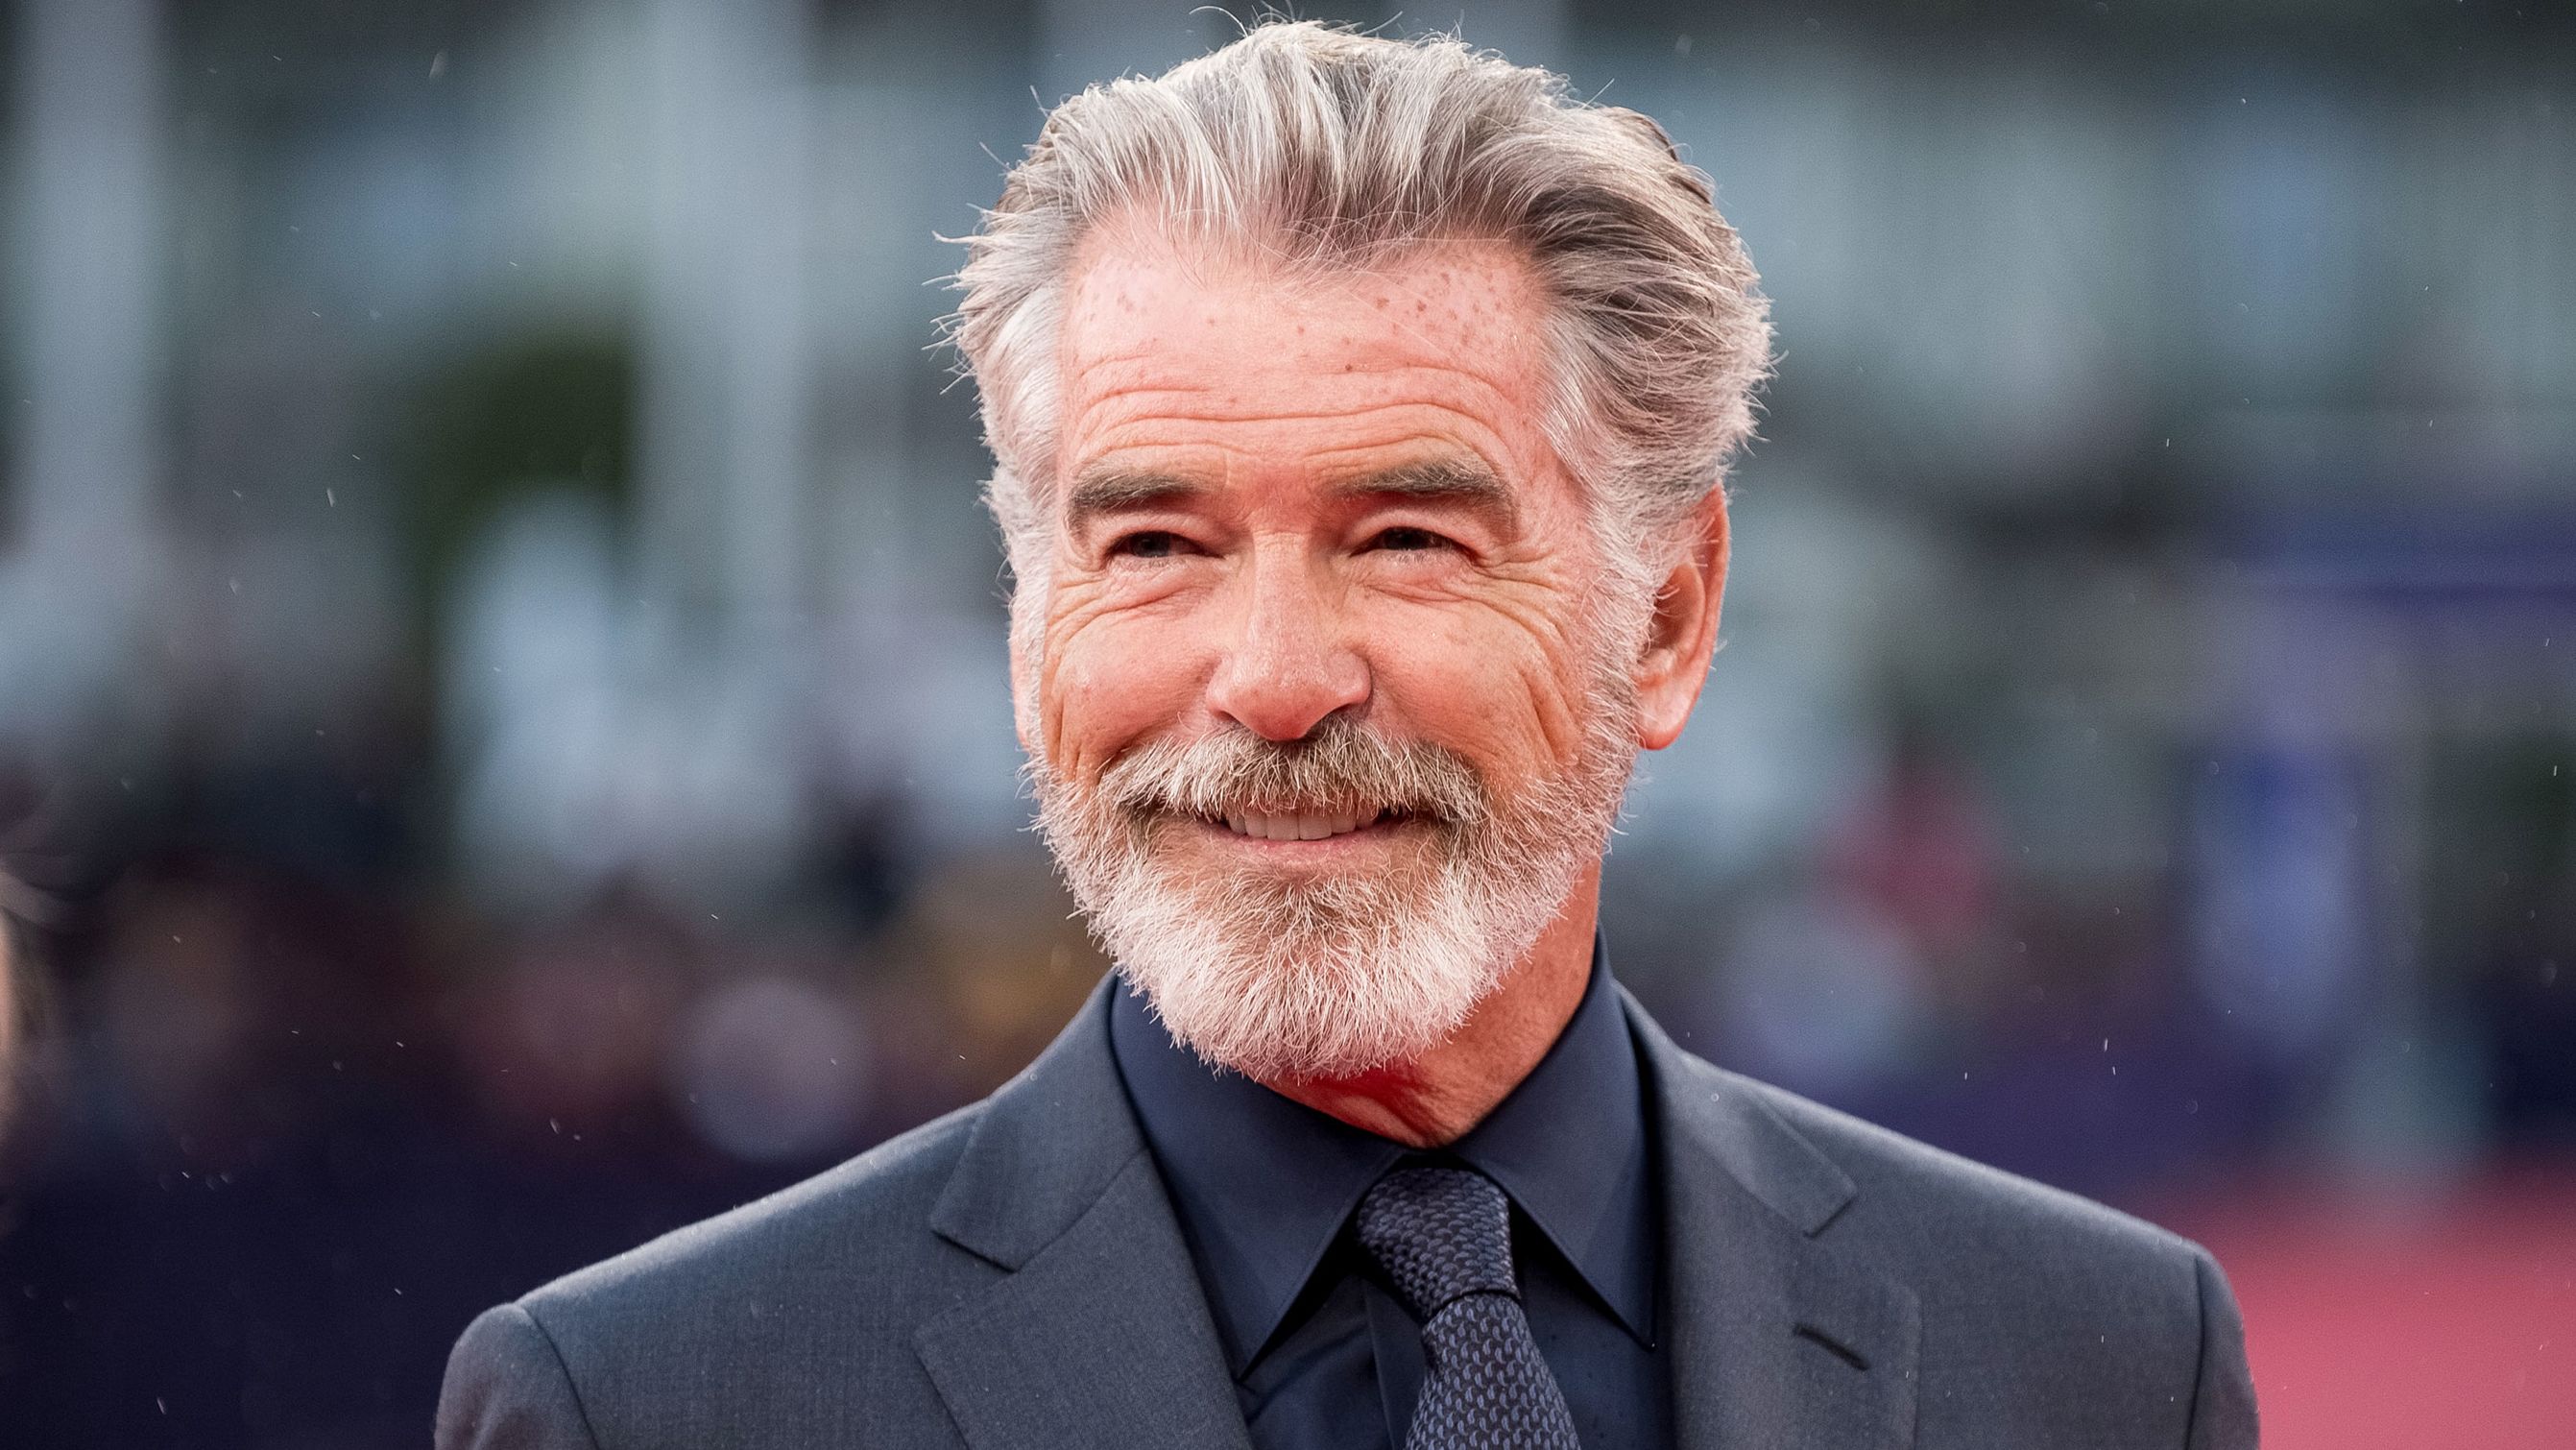 Pierce Brosnan arrives at the Opening Ceremony during the 45th Deauville American Film Festival  on September 06, 2019 in Deauville, France.